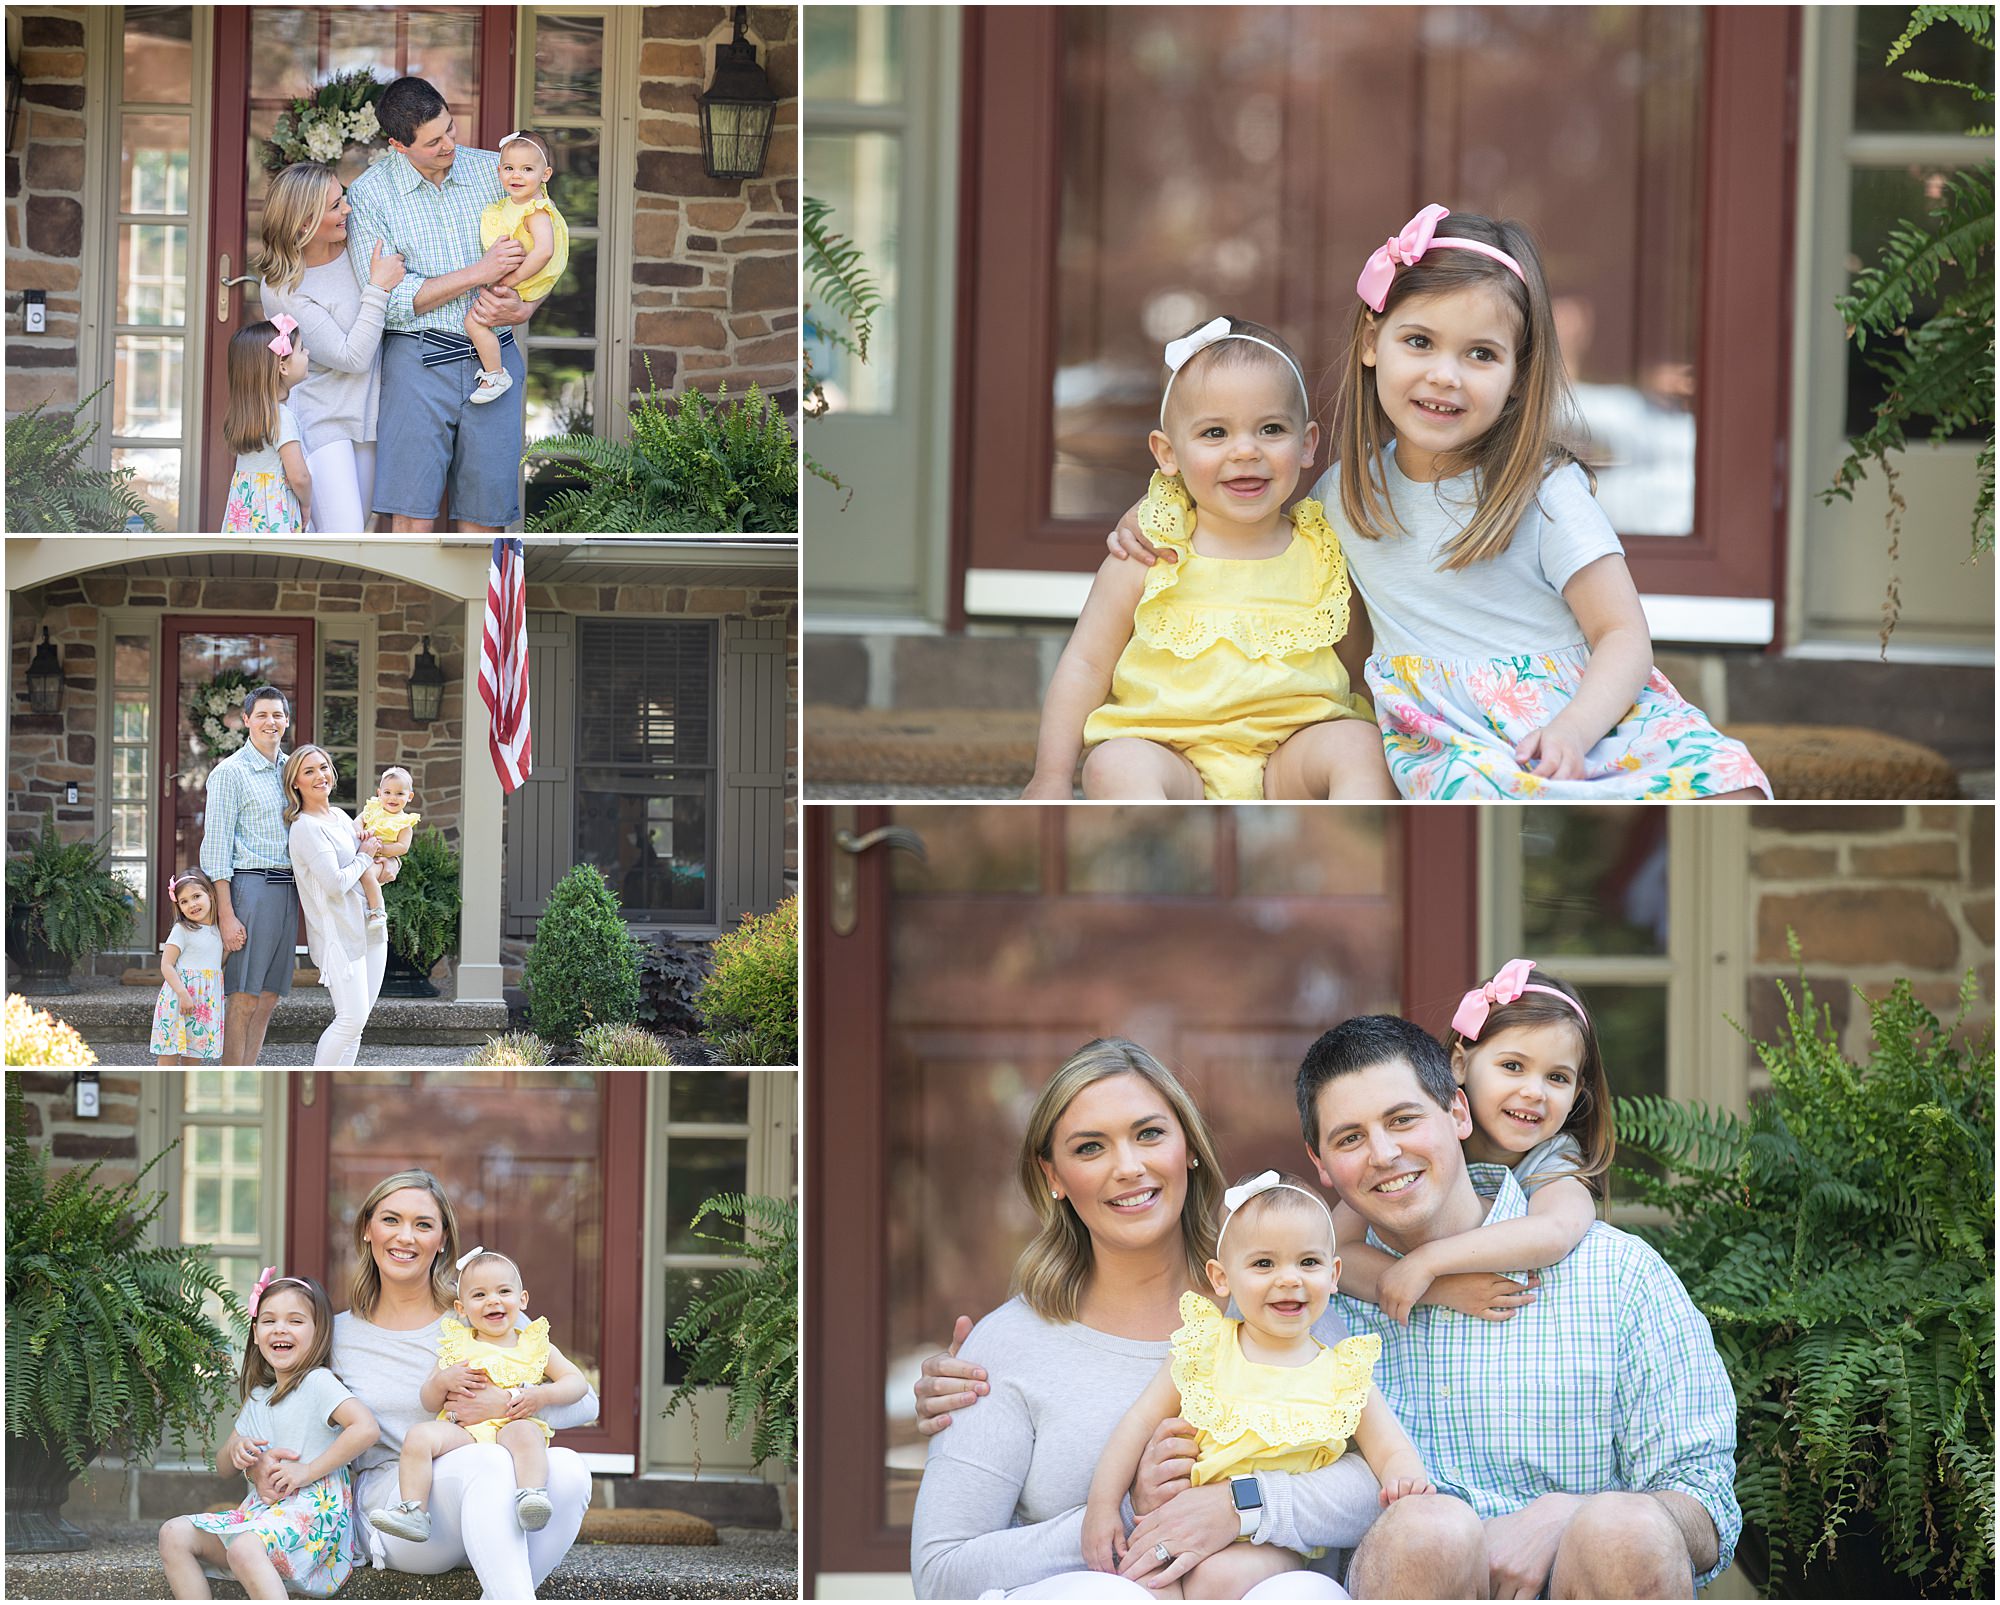 Moorestown Family Photographer | Susan Hennessey Photography